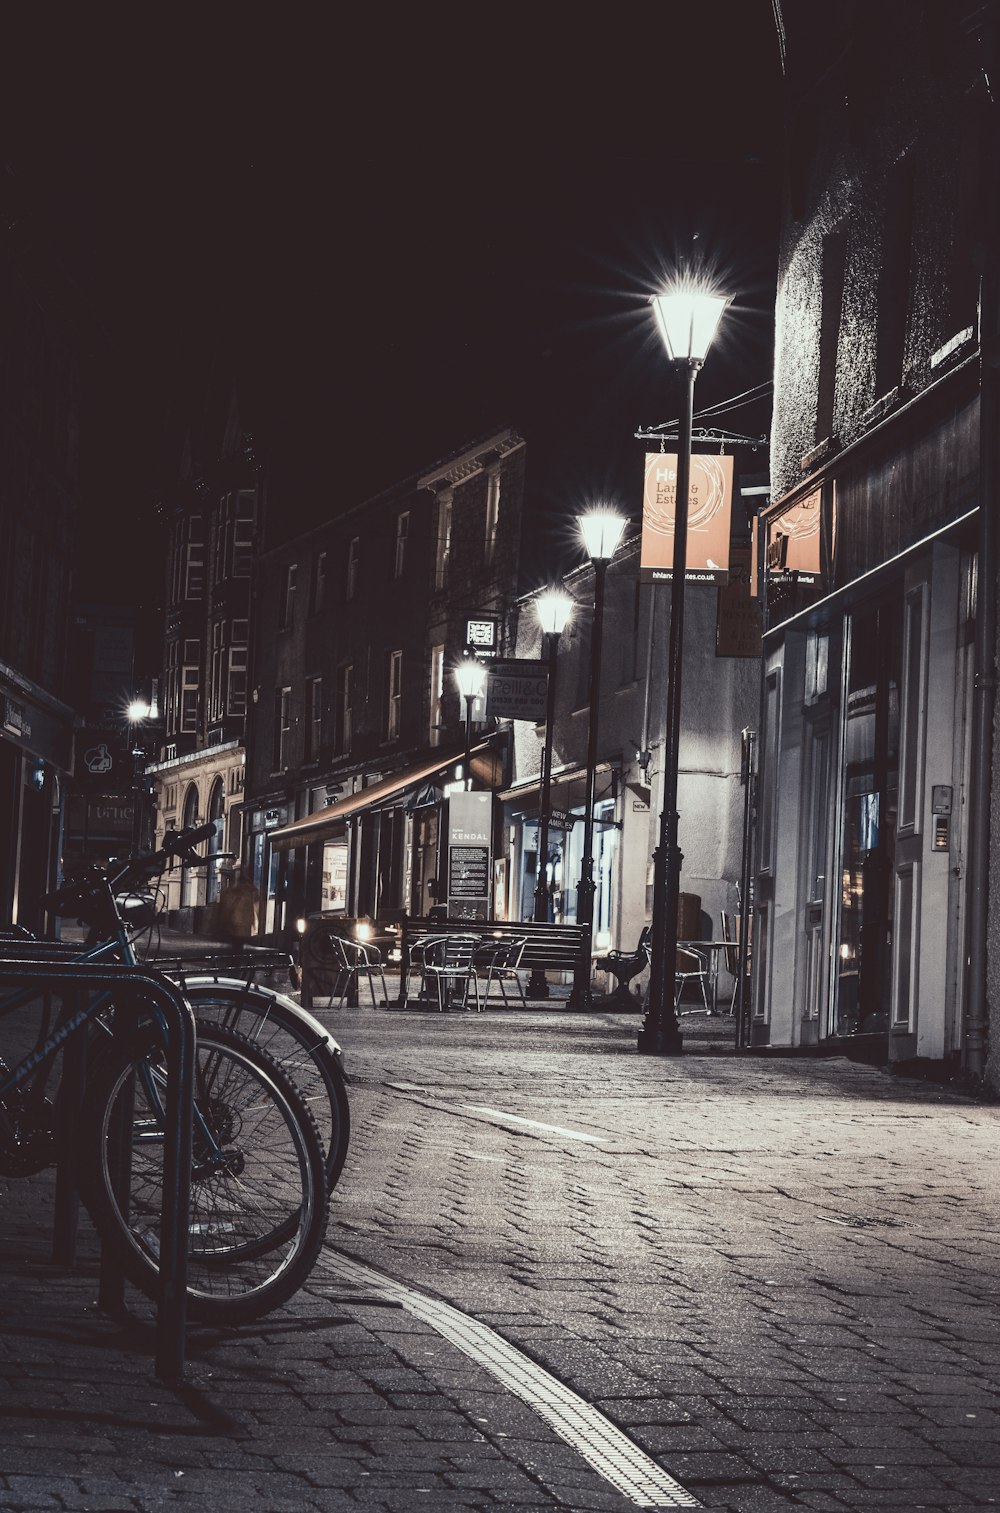 black bicycle parked beside building during night time